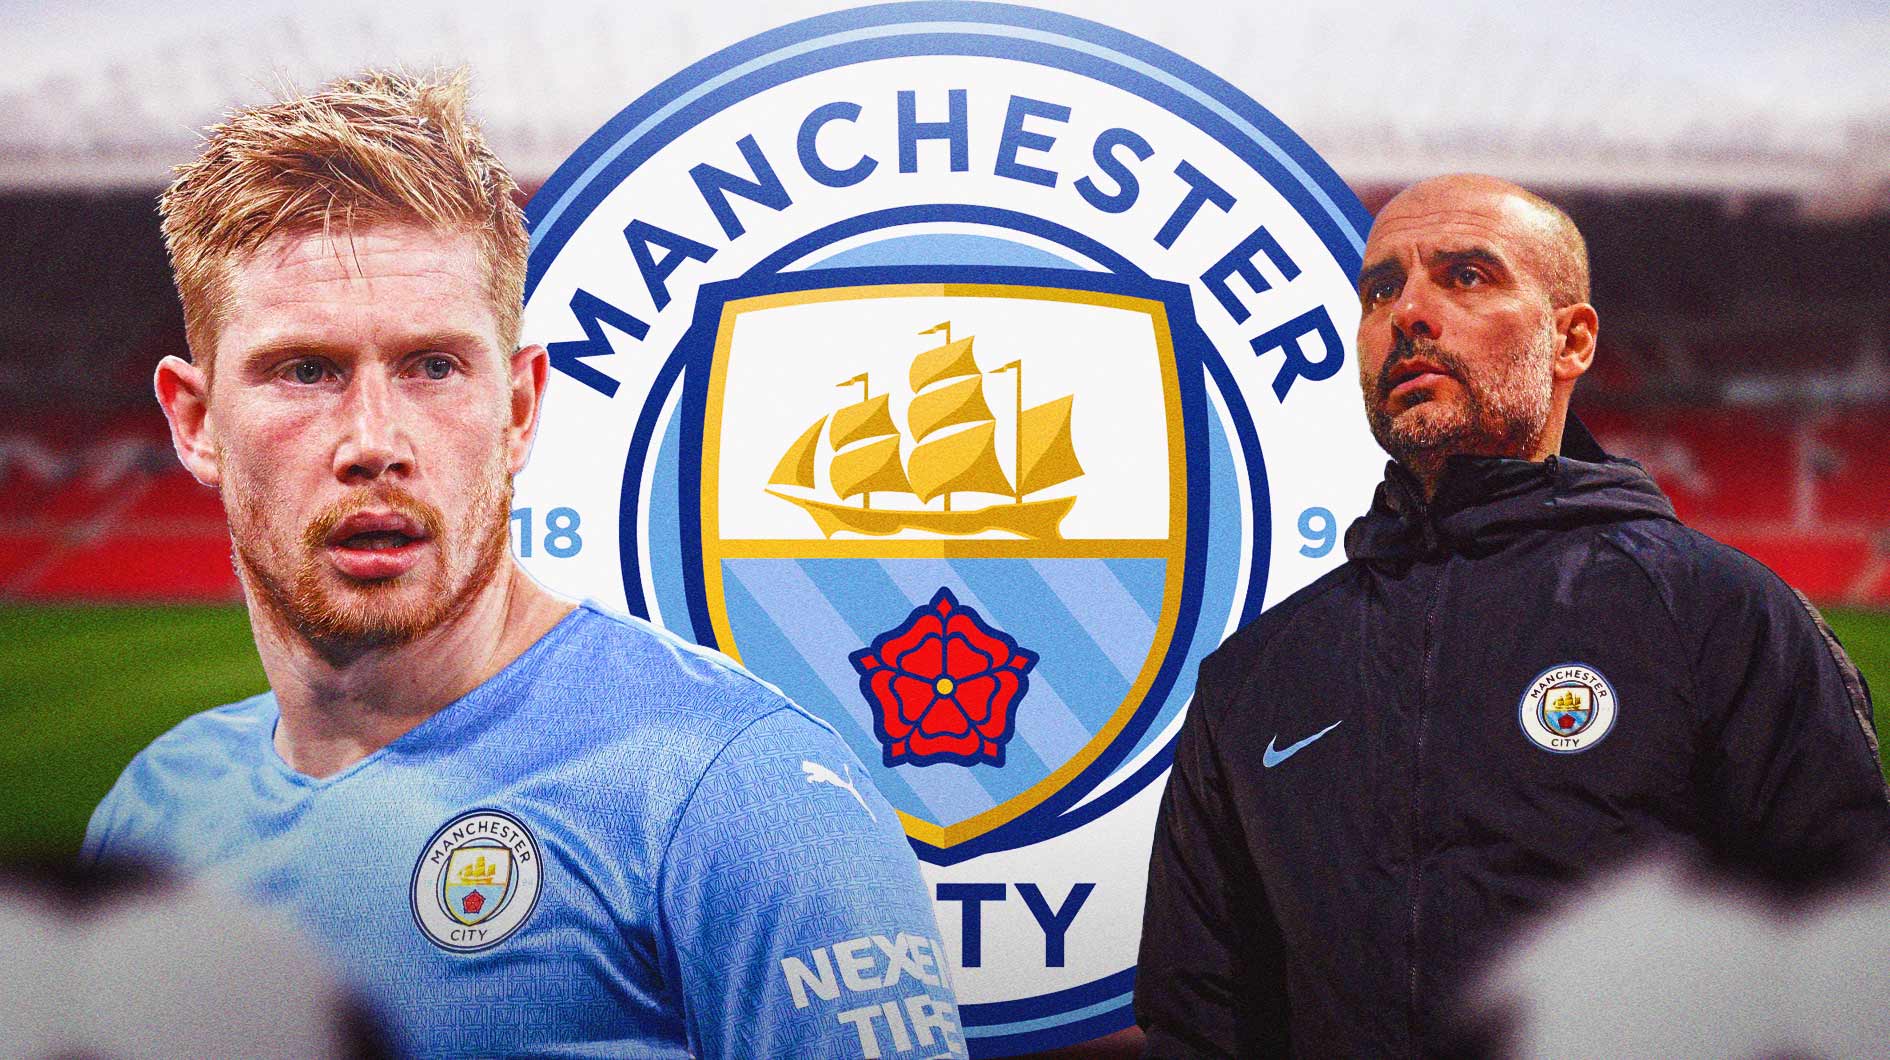 Kevin De Bruyne and Pep Guardiola in front of the Manchester City logo